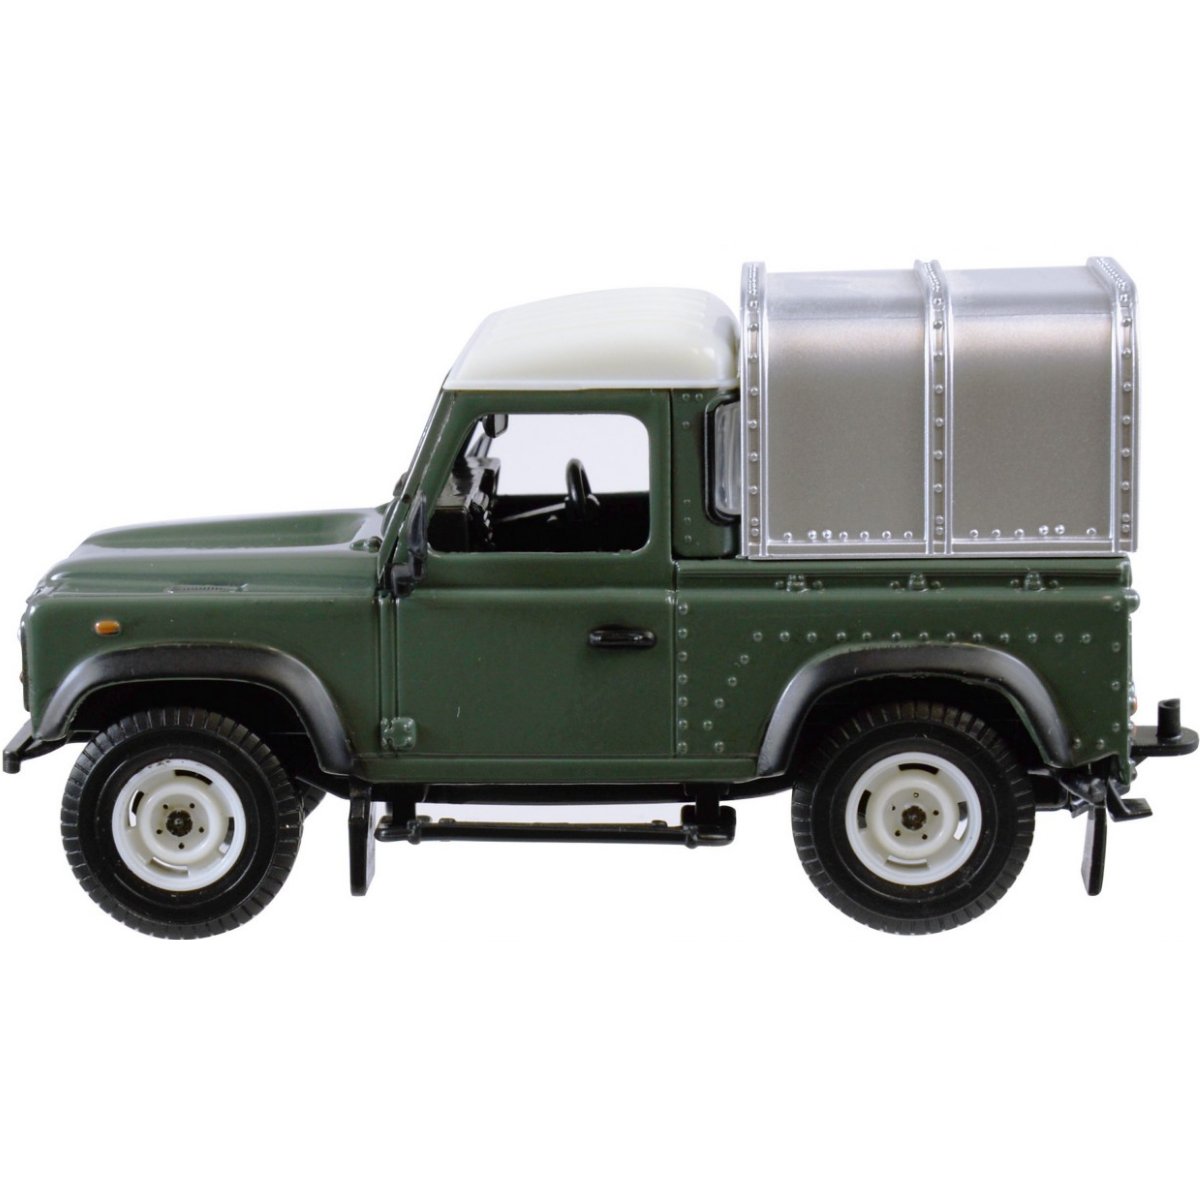 Britains Green Land Rover Defender 90 & Canopy - 1:32 Scale - Phillips Hobbies